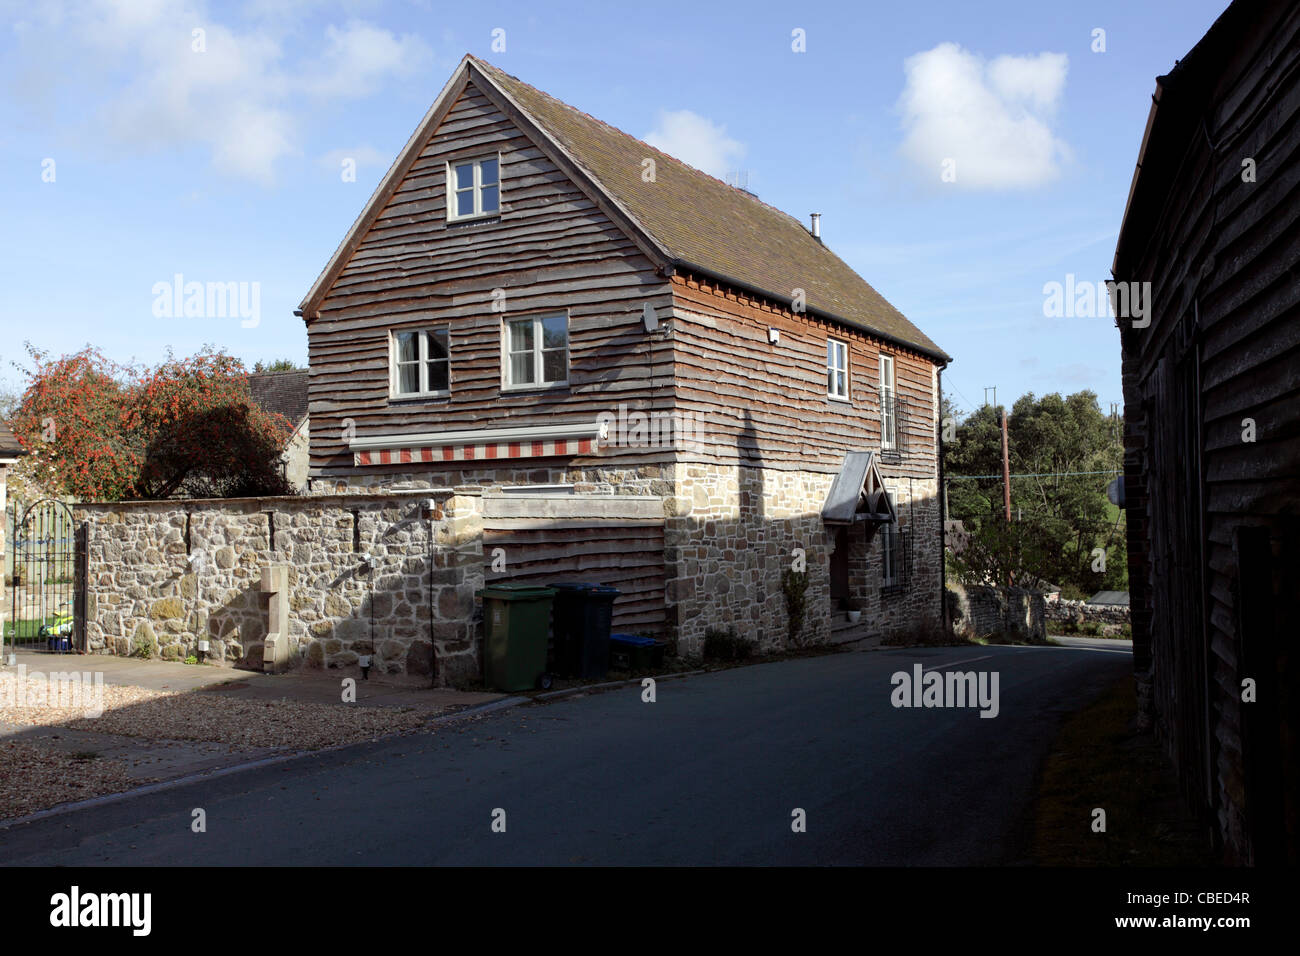 A home in the beautiful village of Cardington in Shropshire. Stock Photo